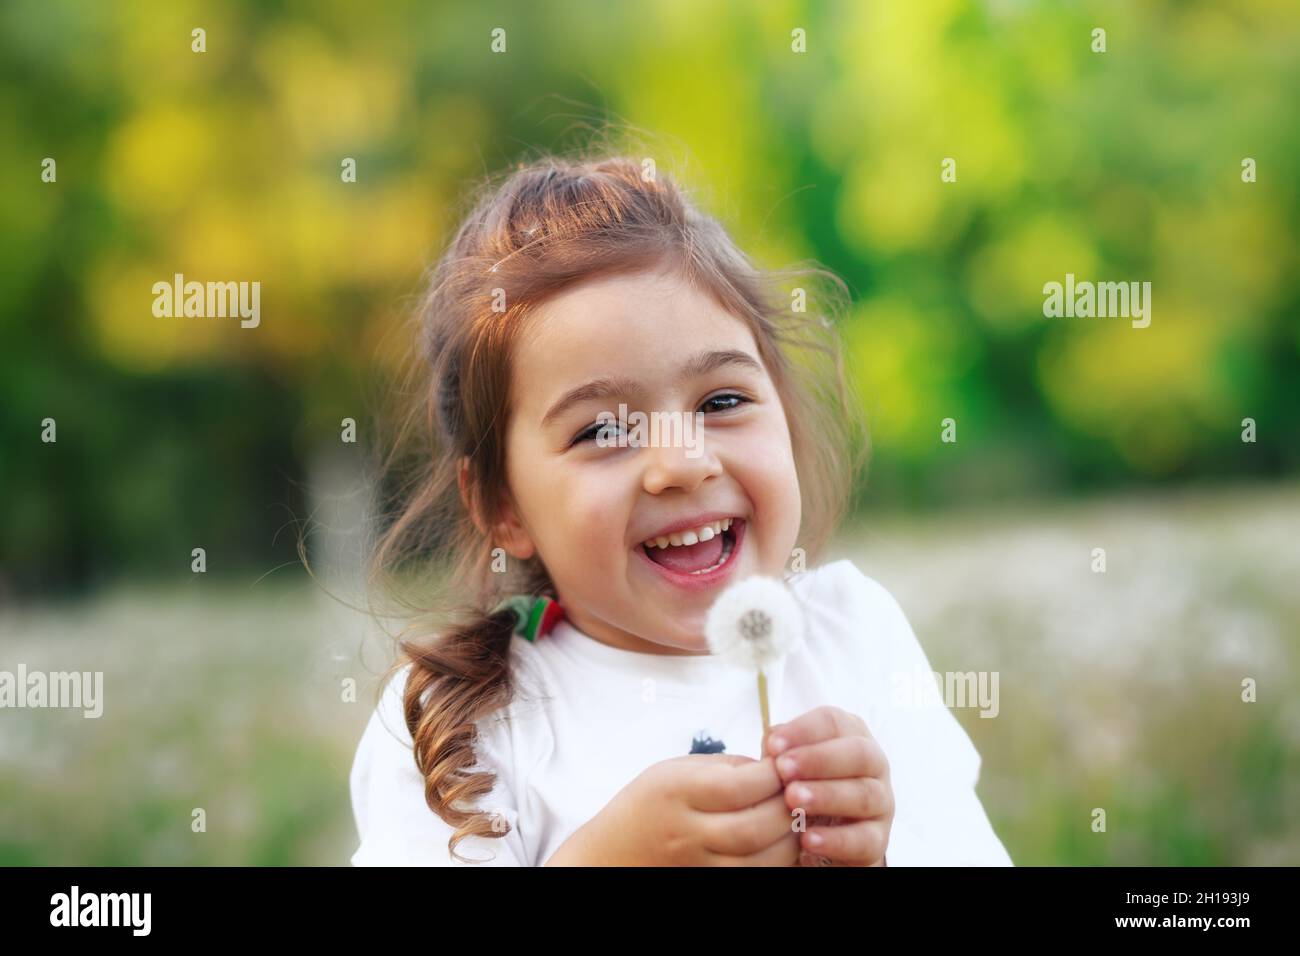 Pretty  little girl  is smiling in the park with dandelion flower. Happy cute kid having fun outdoors at sunset. Stock Photo